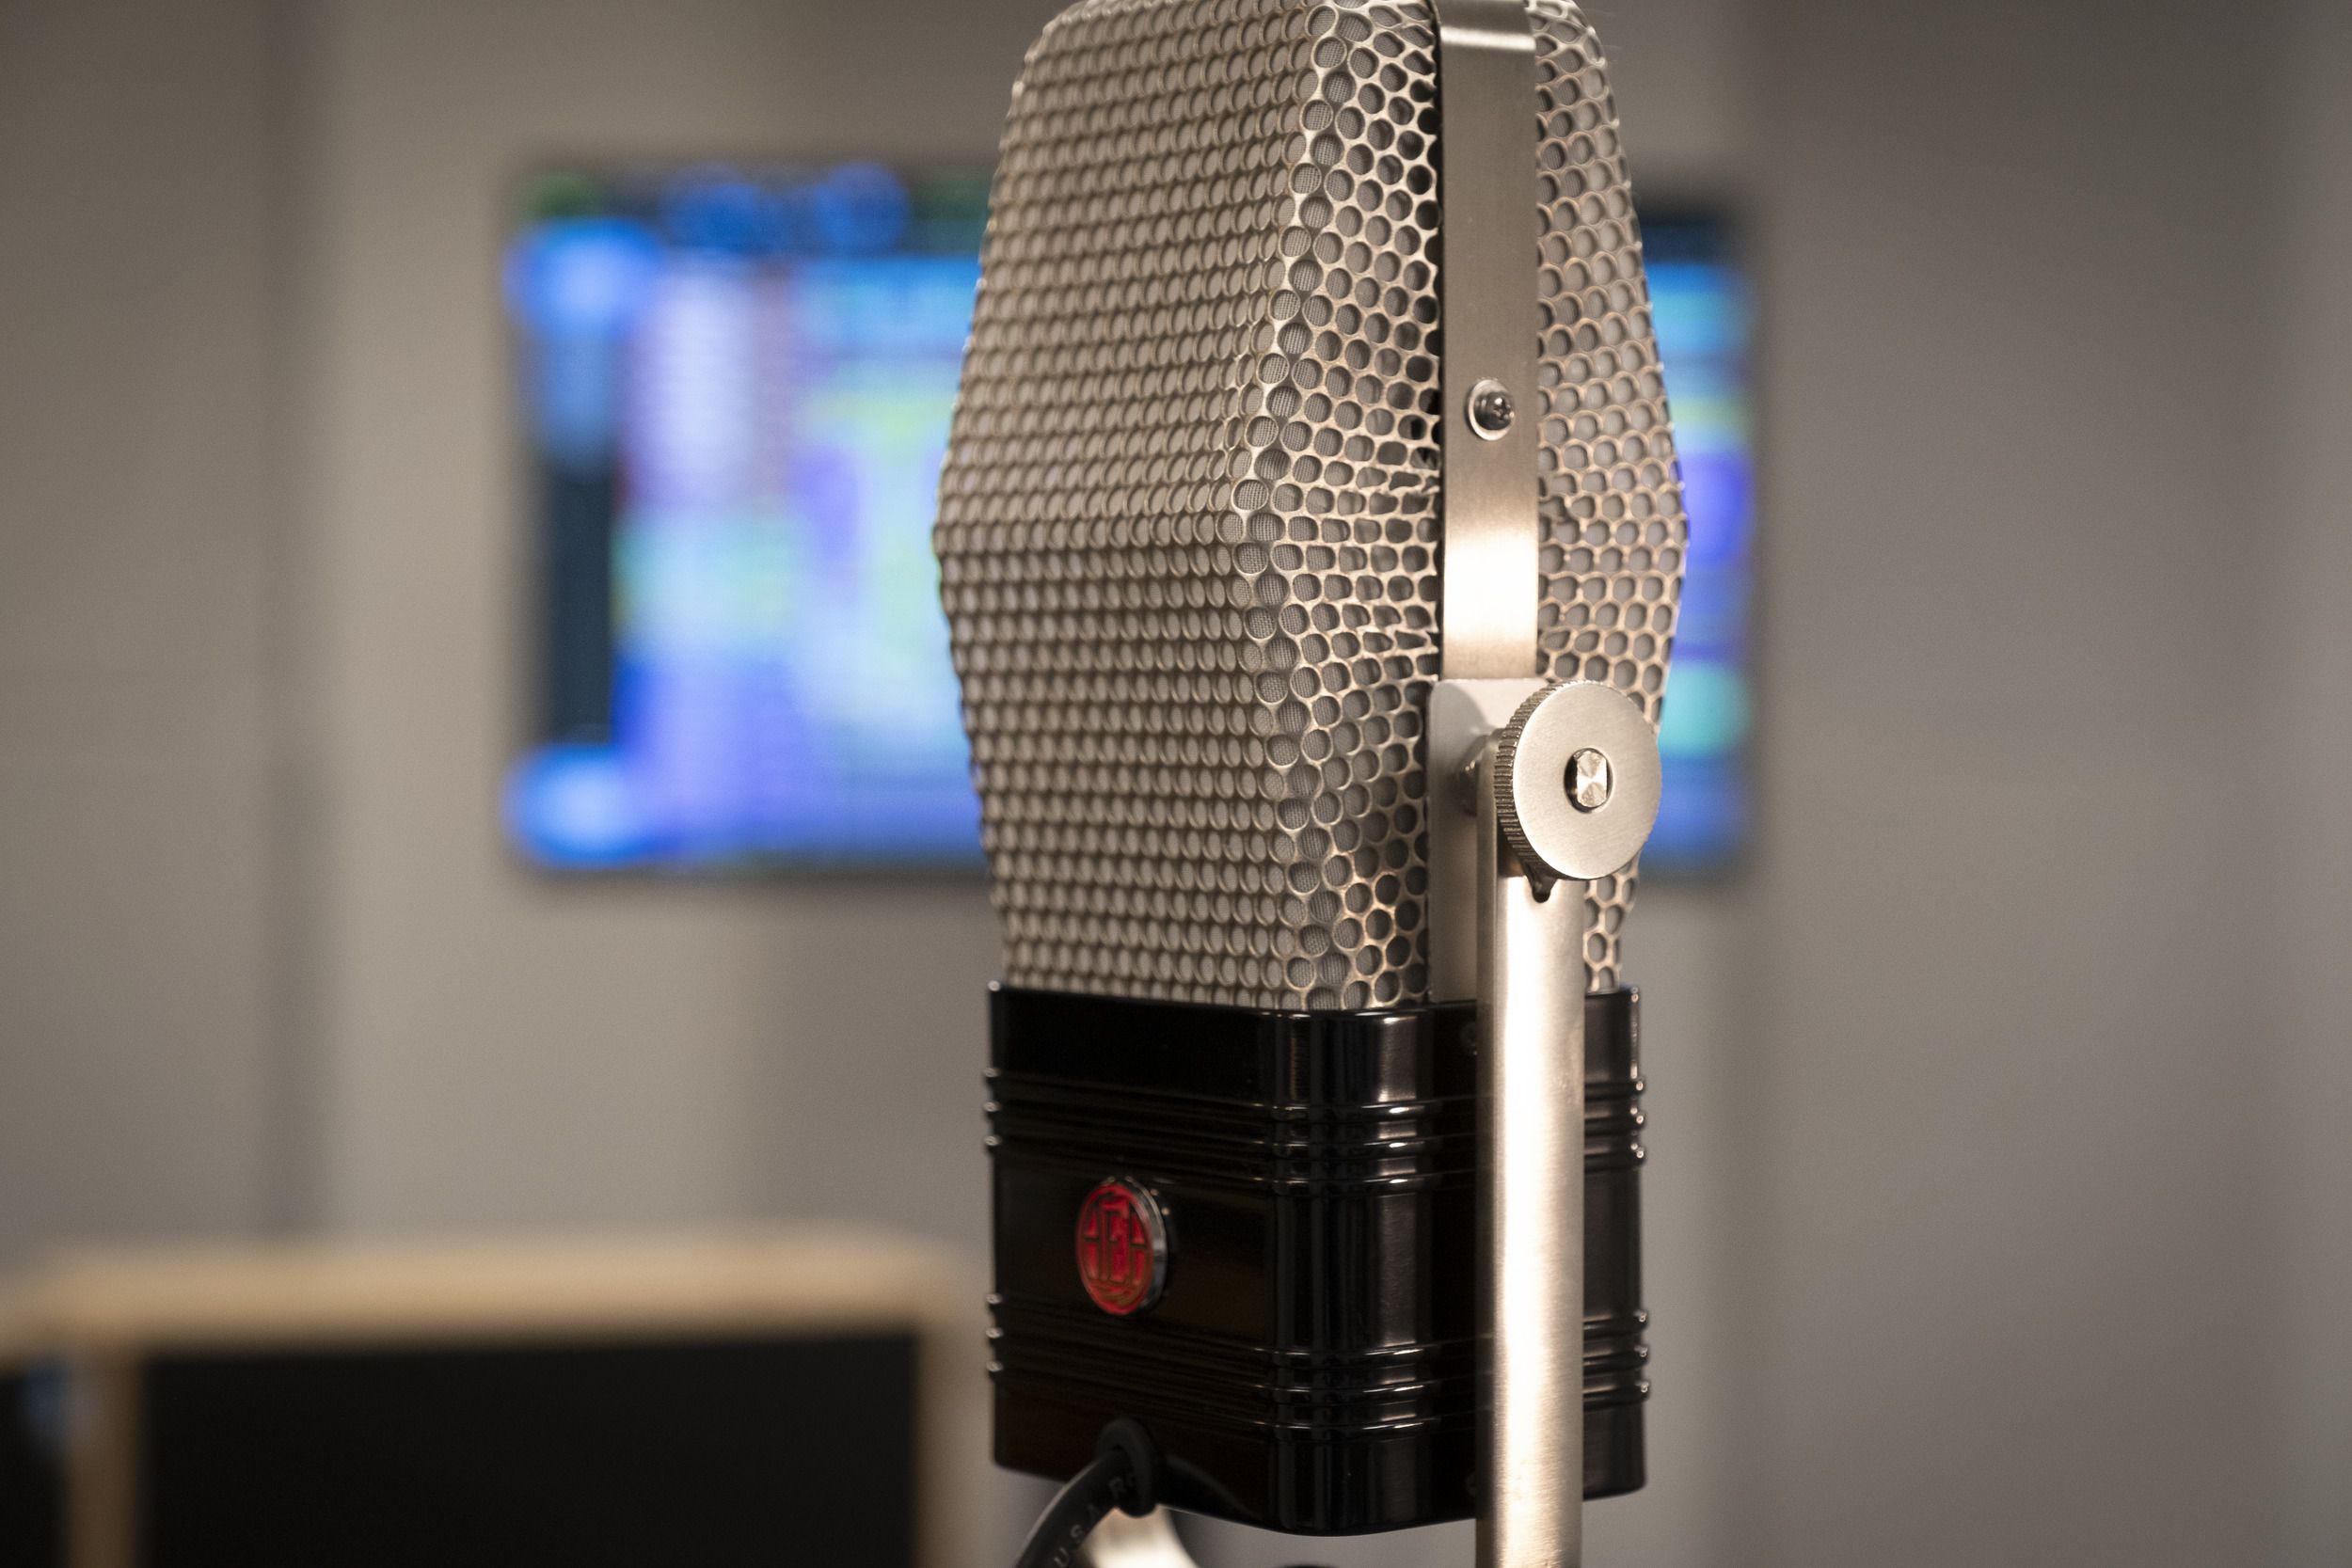 Mic set up vertically for recording